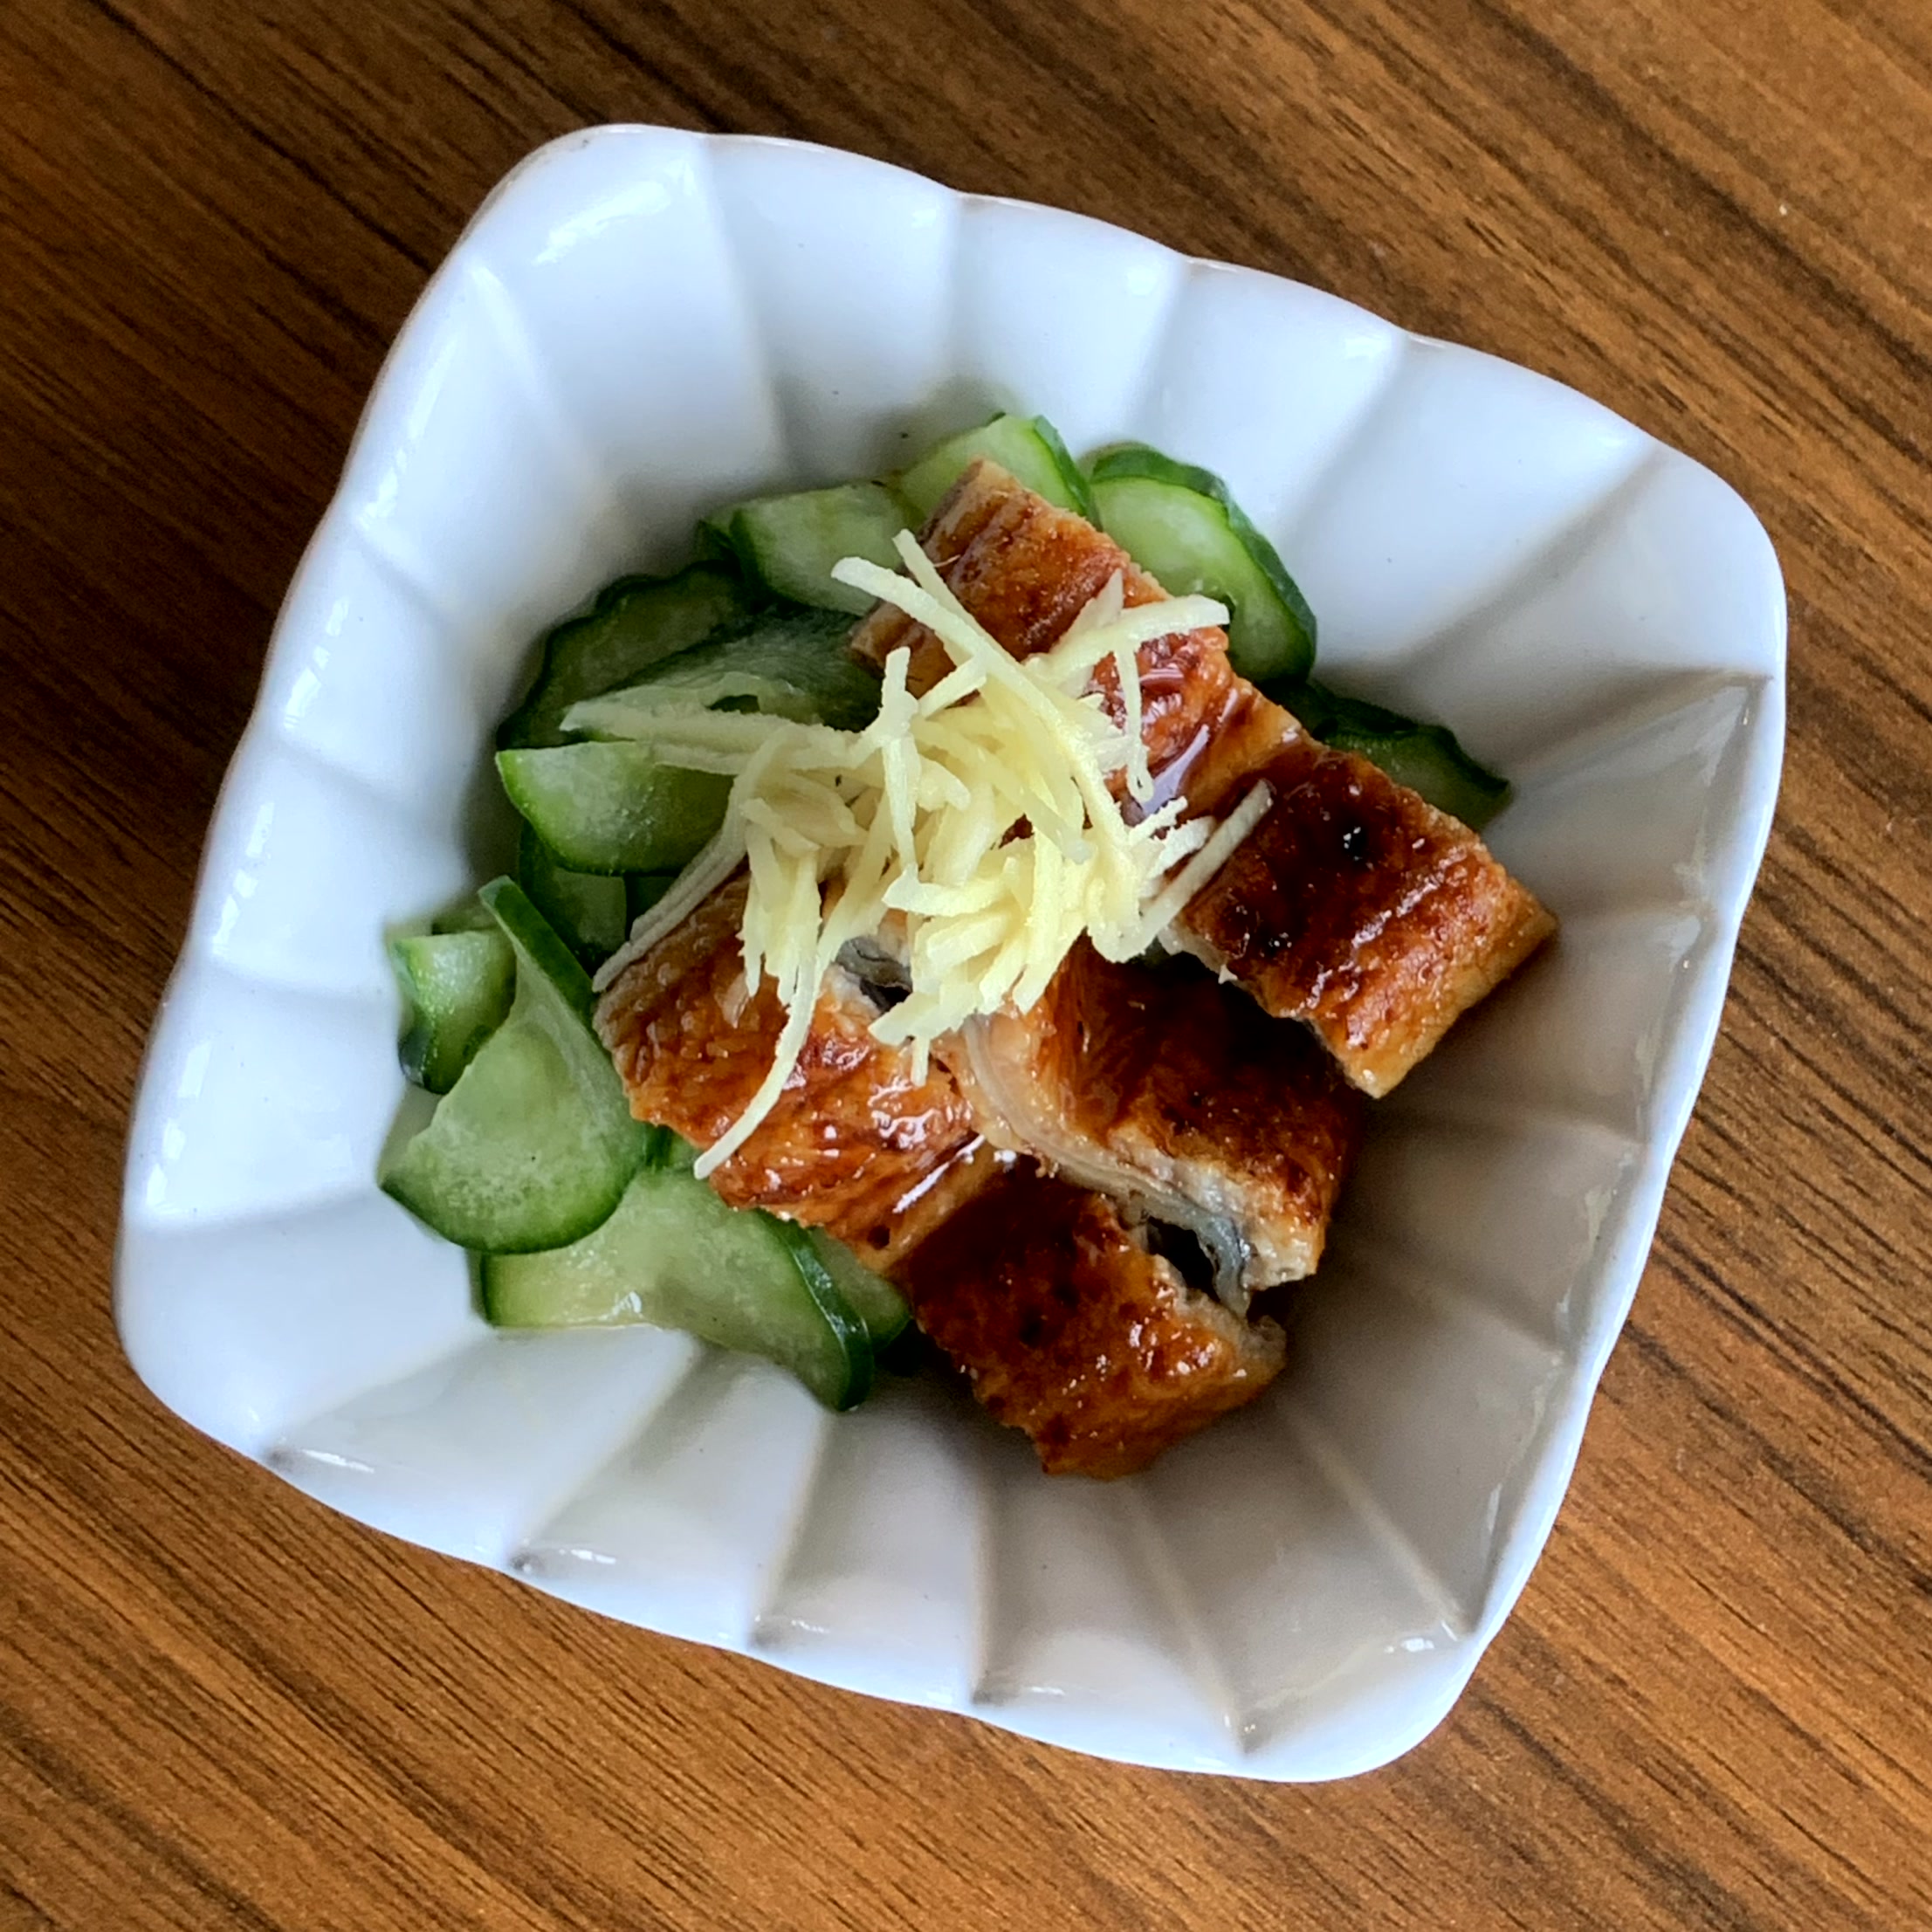 A dish of glaze-grilled eel and cucumbers marinated in vinegar.